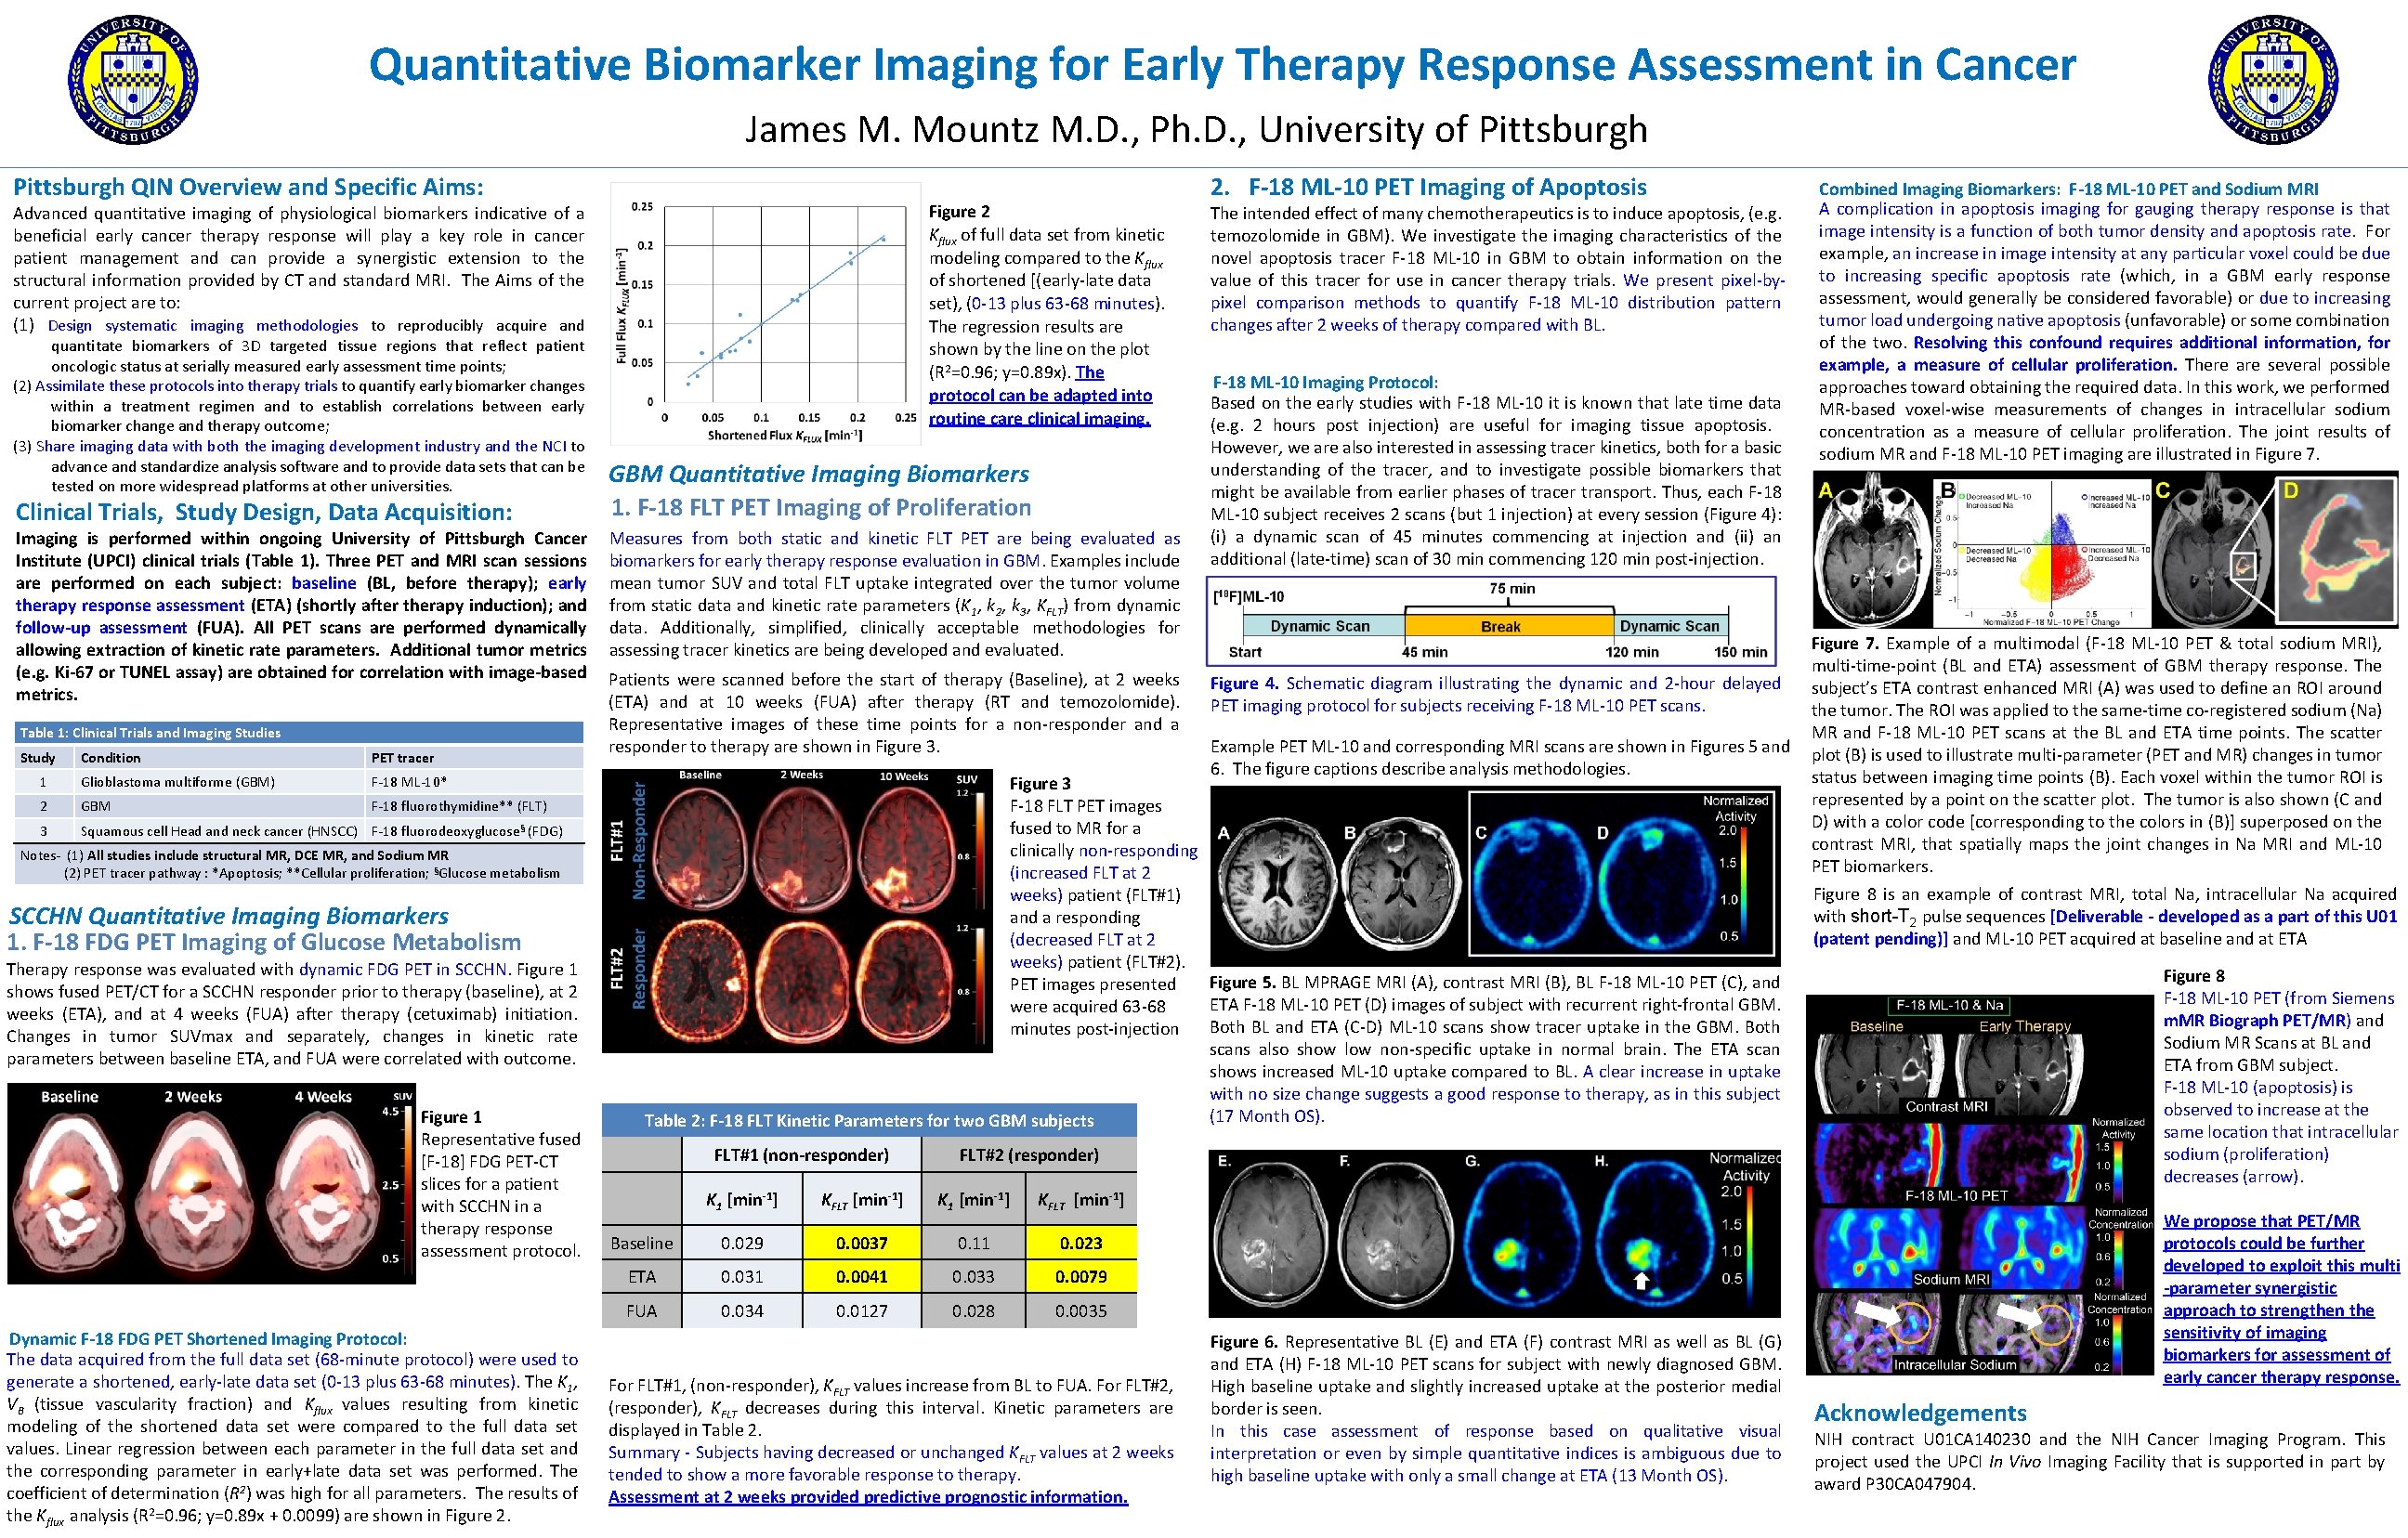 Quantitative Biomarker Imaging for Early Therapy Response Assessment in Cancer James M. Mountz M.